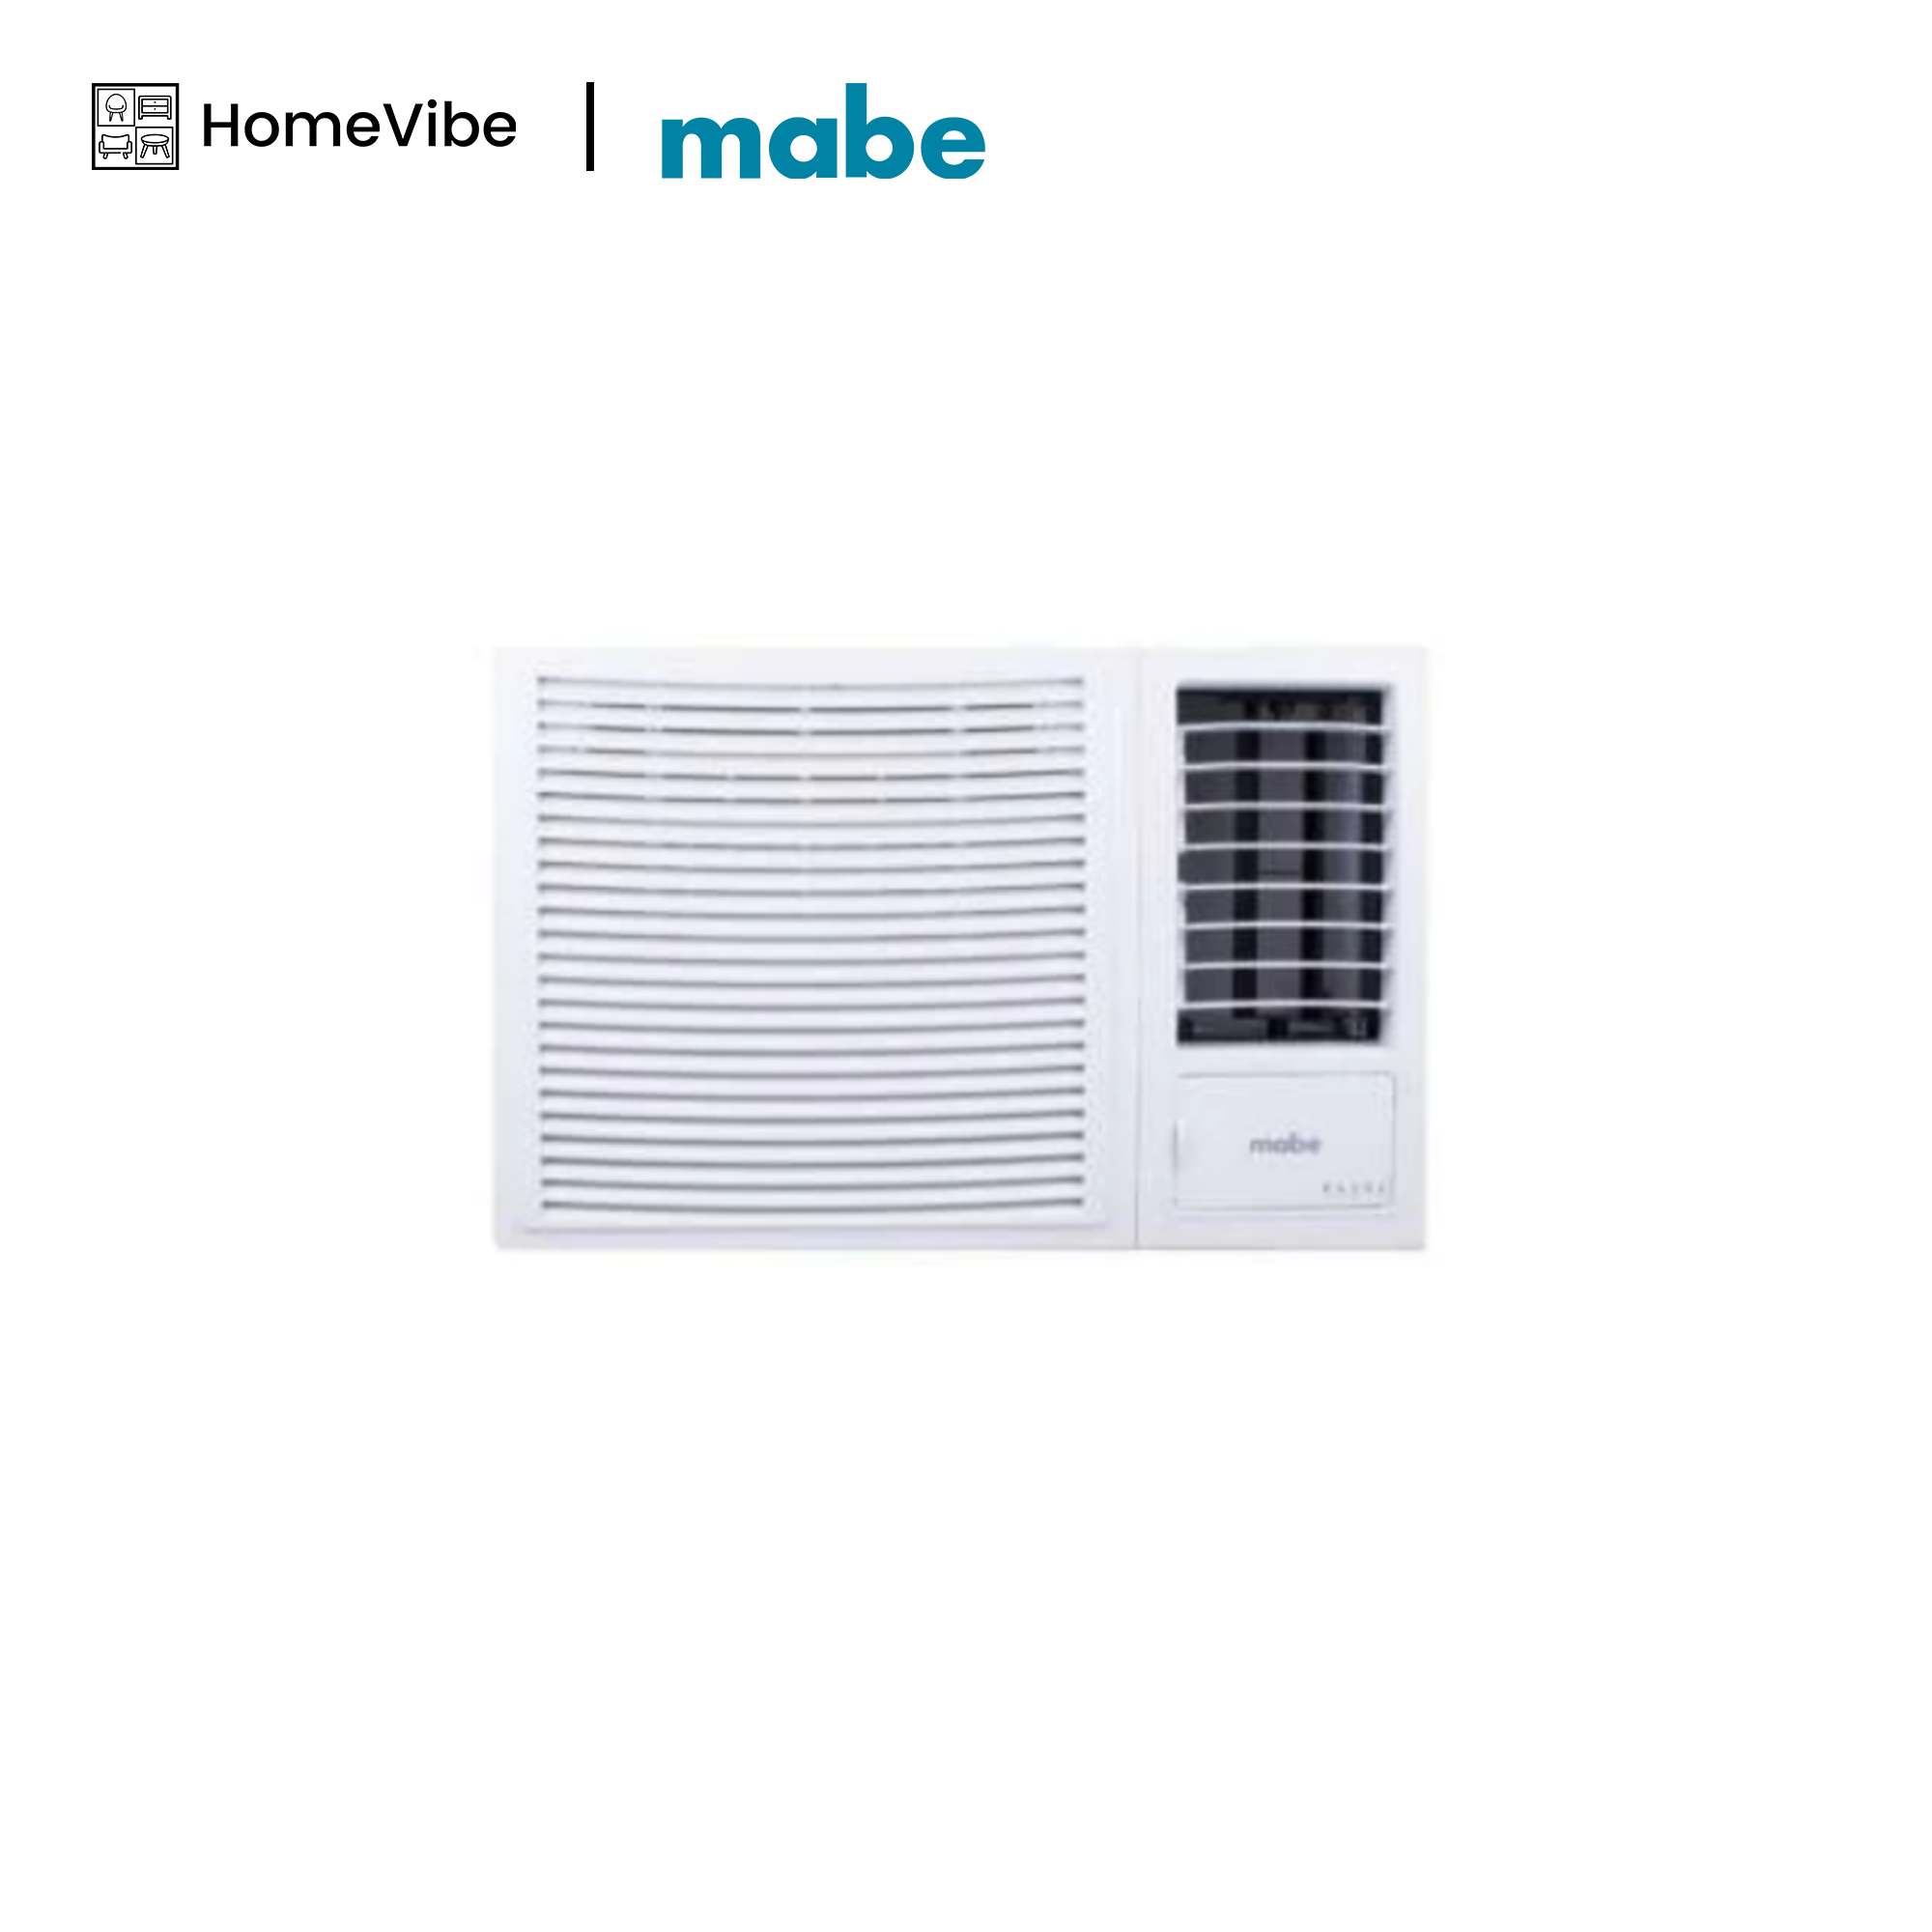 Mabe Appliances 2hp Manual Control Window Type Air Conditioner MEV18VV